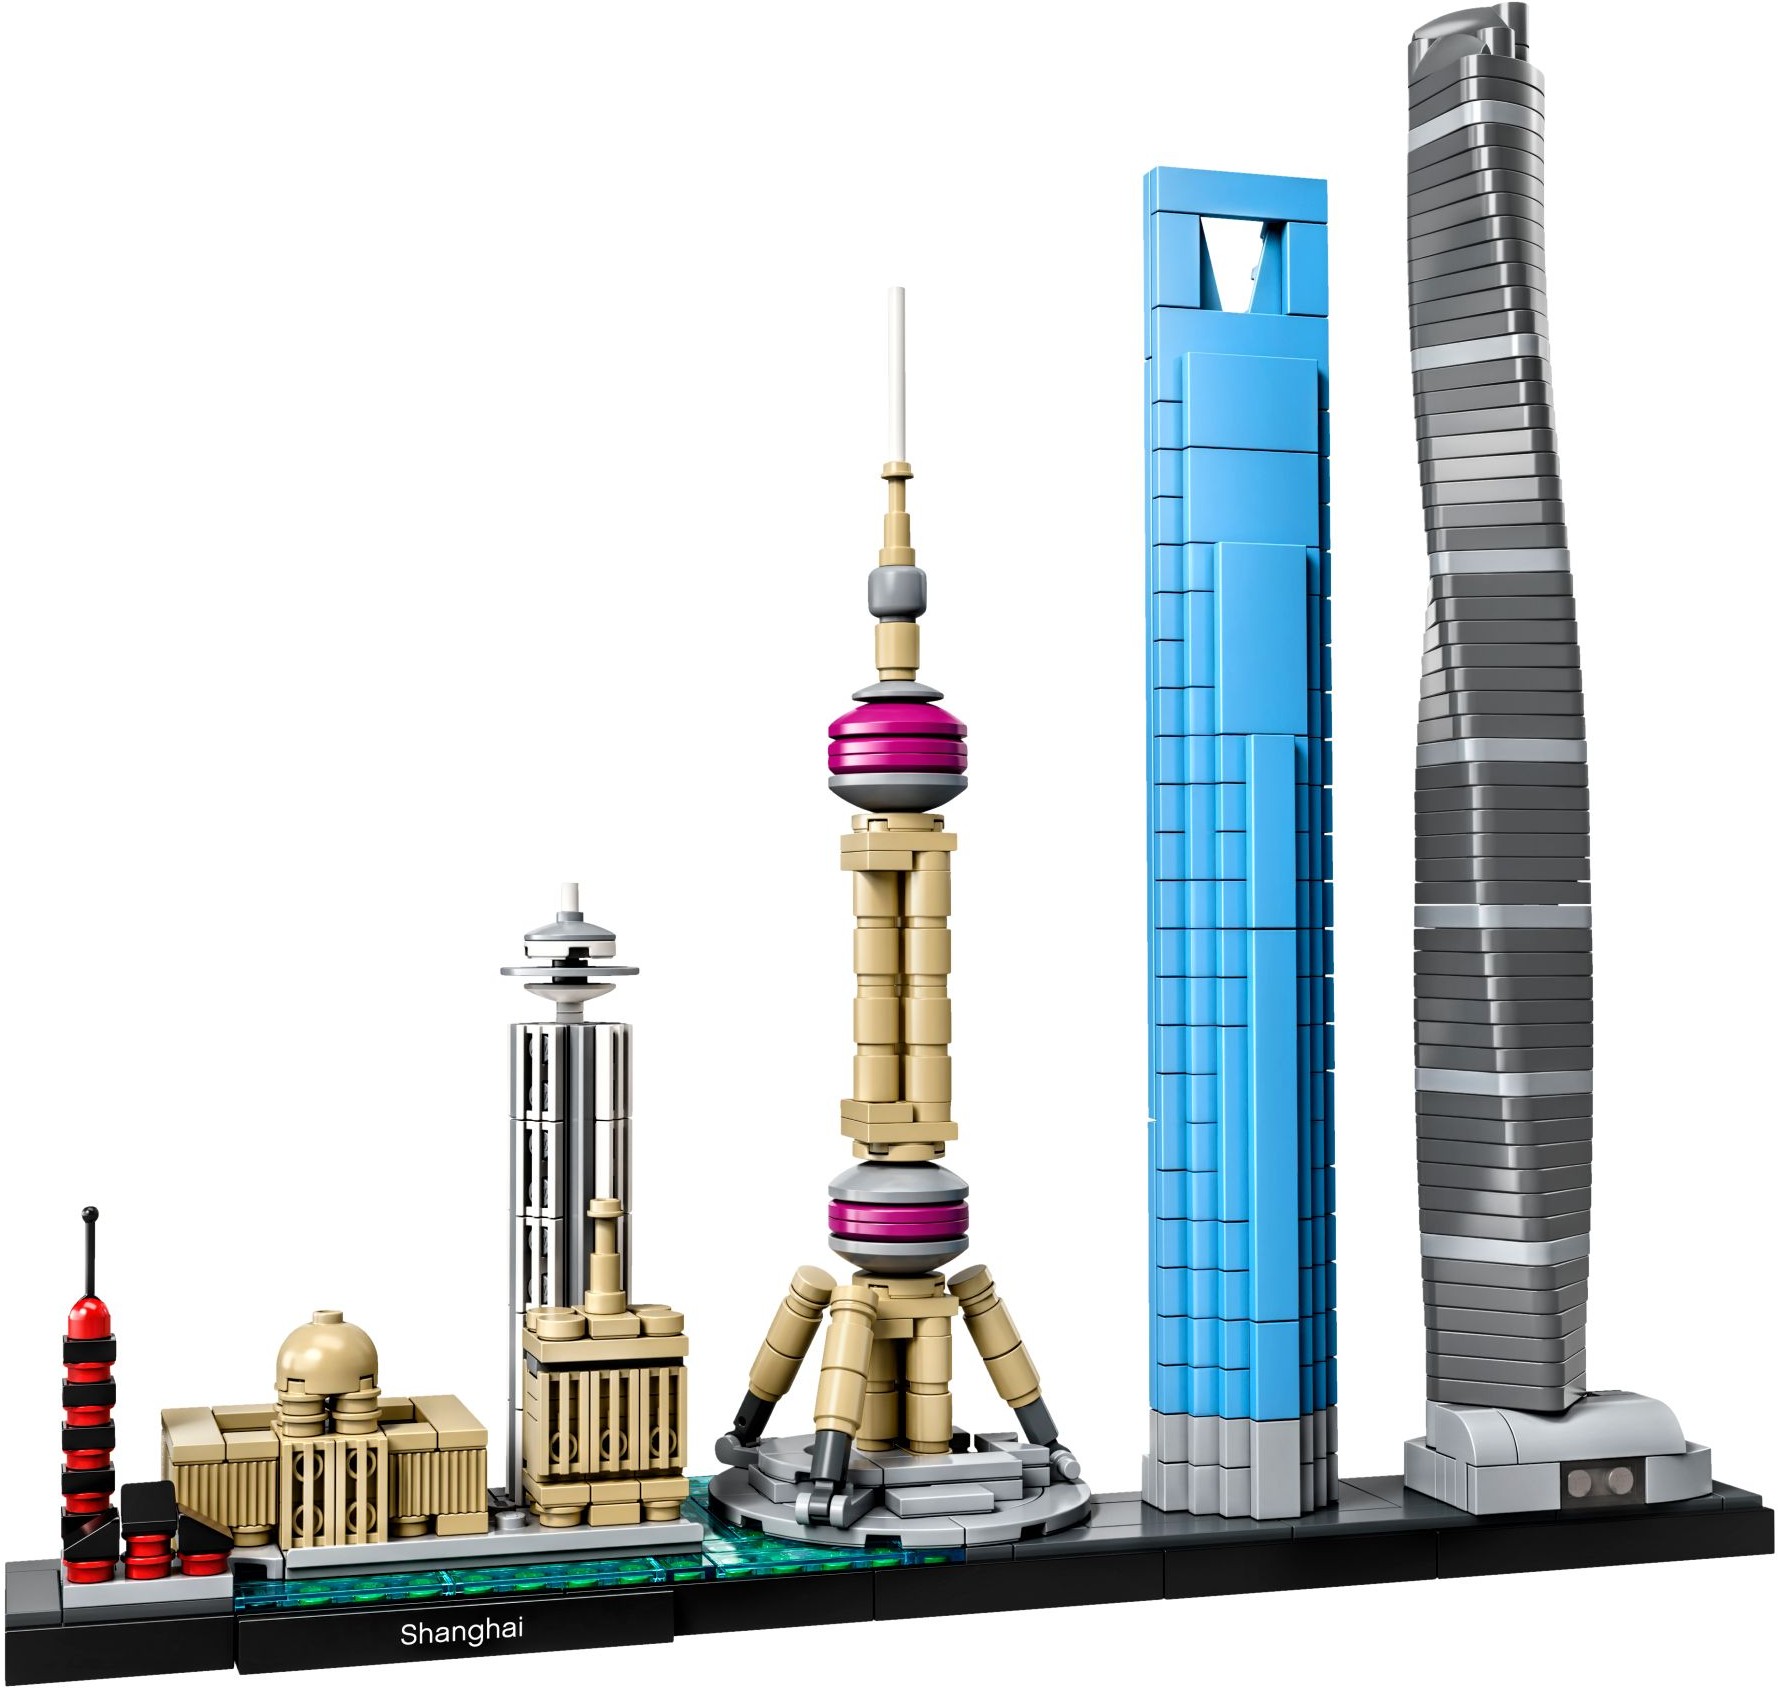 World Classic City Architecture Skyline Collection Shanghai Building Blocks Assembly Classic Model Kit DIY Kids Bricks Toys Gift alx